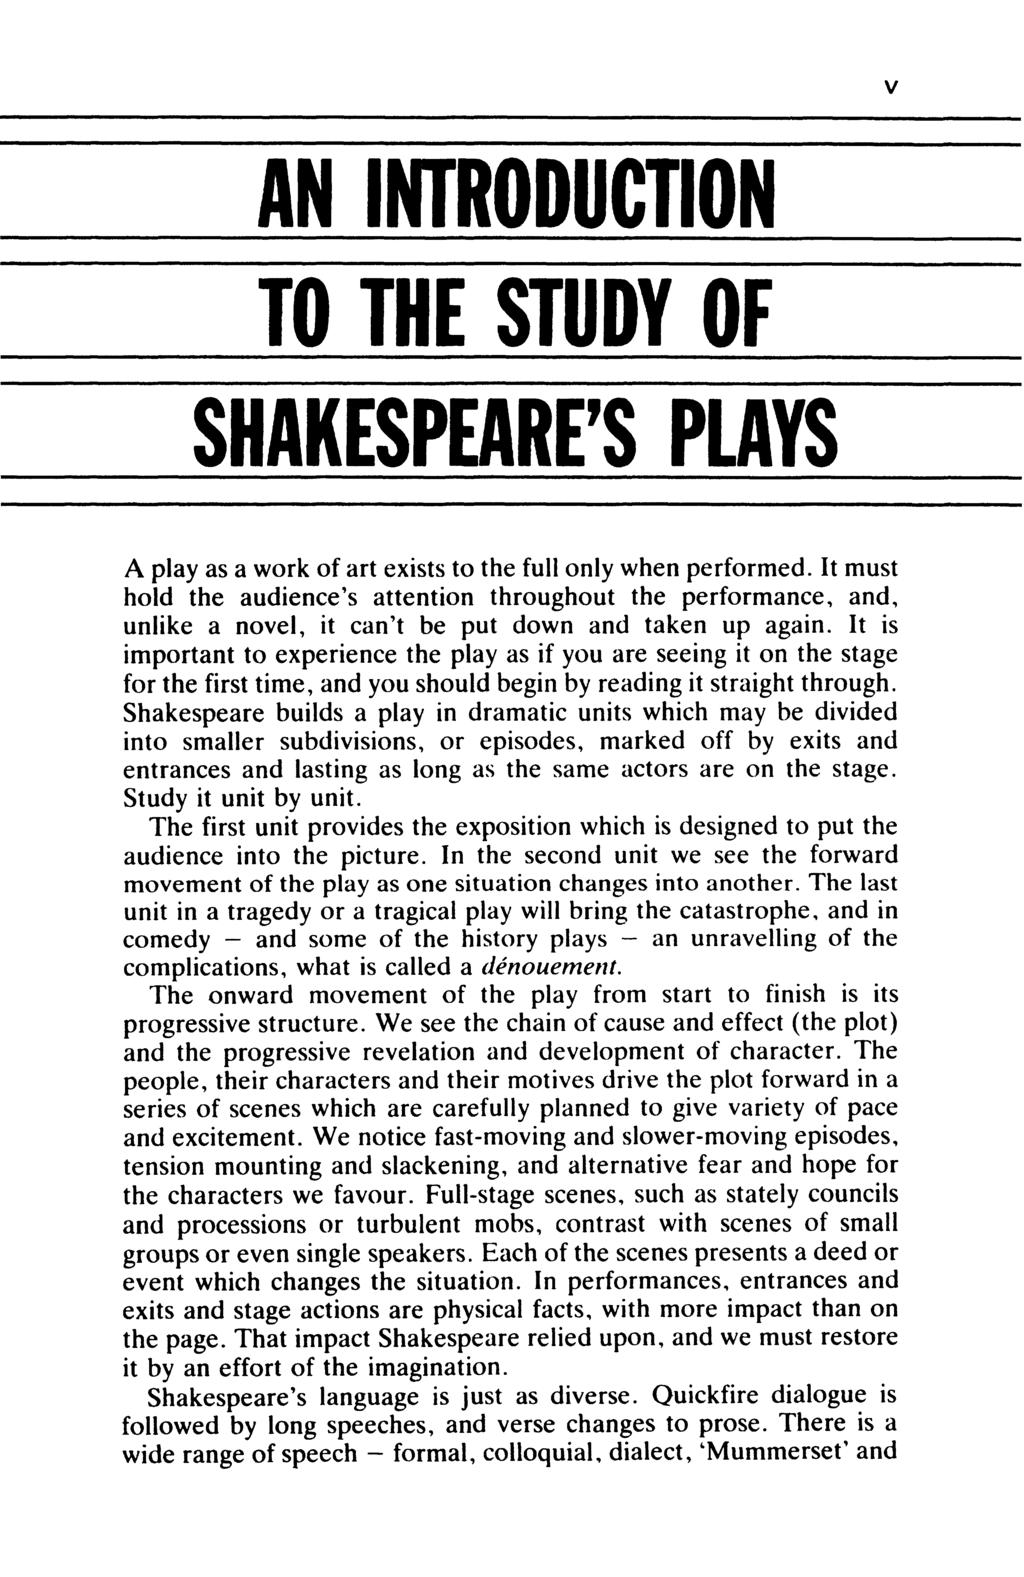 v AN INTRODUCTION TO THE STUDY OF SHAKESPEARE'S PLAYS A play as a work of art exists to the full only when performed.